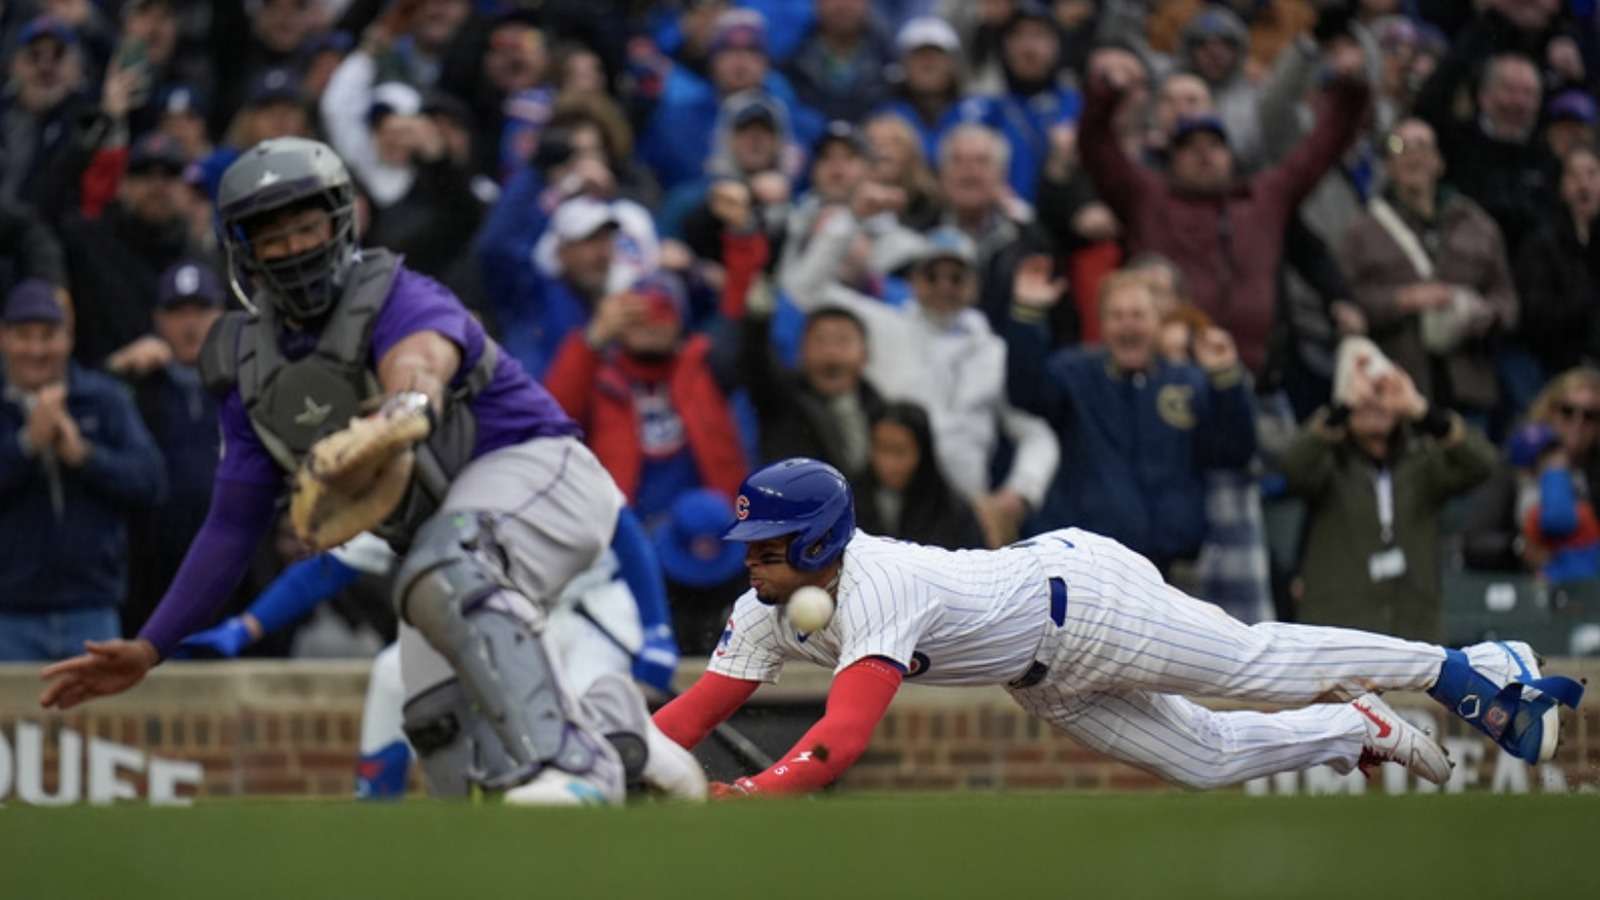 The Rockies defense allows embarrassing “little league” inside-the-park home run vs. Cubs